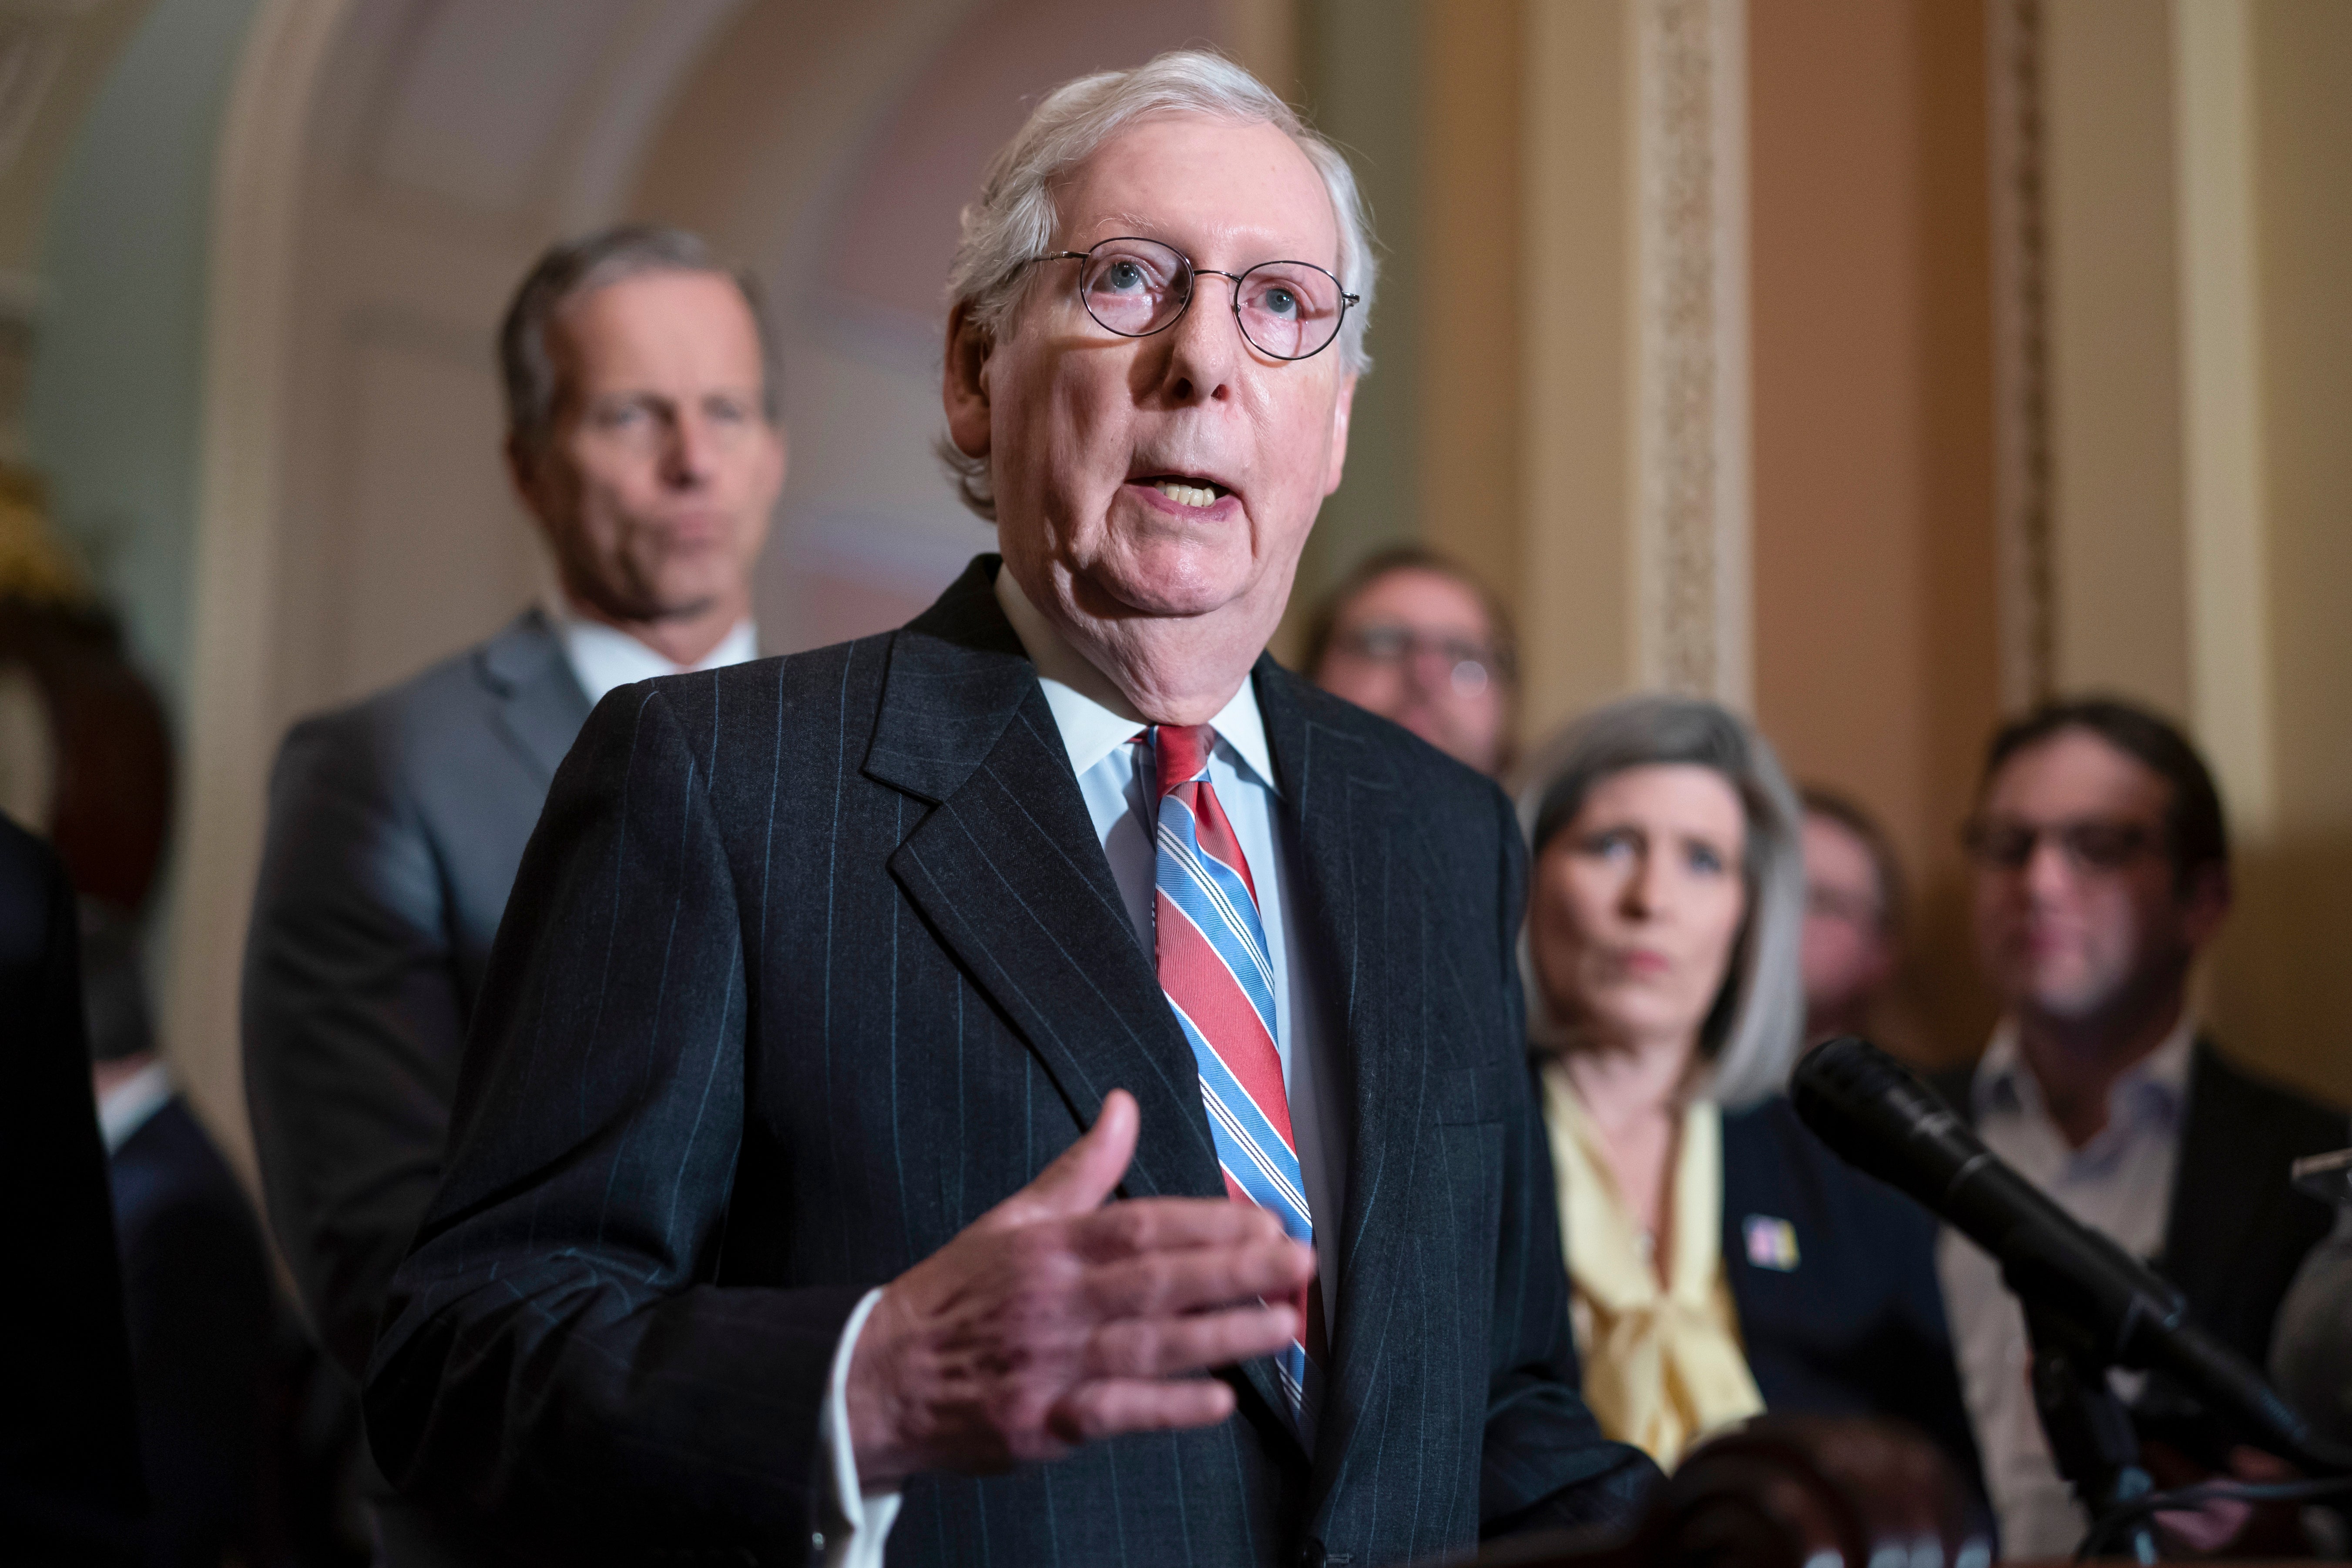 Sen. Mitch McConnell discharged from hospital after being treated for concussion from fall